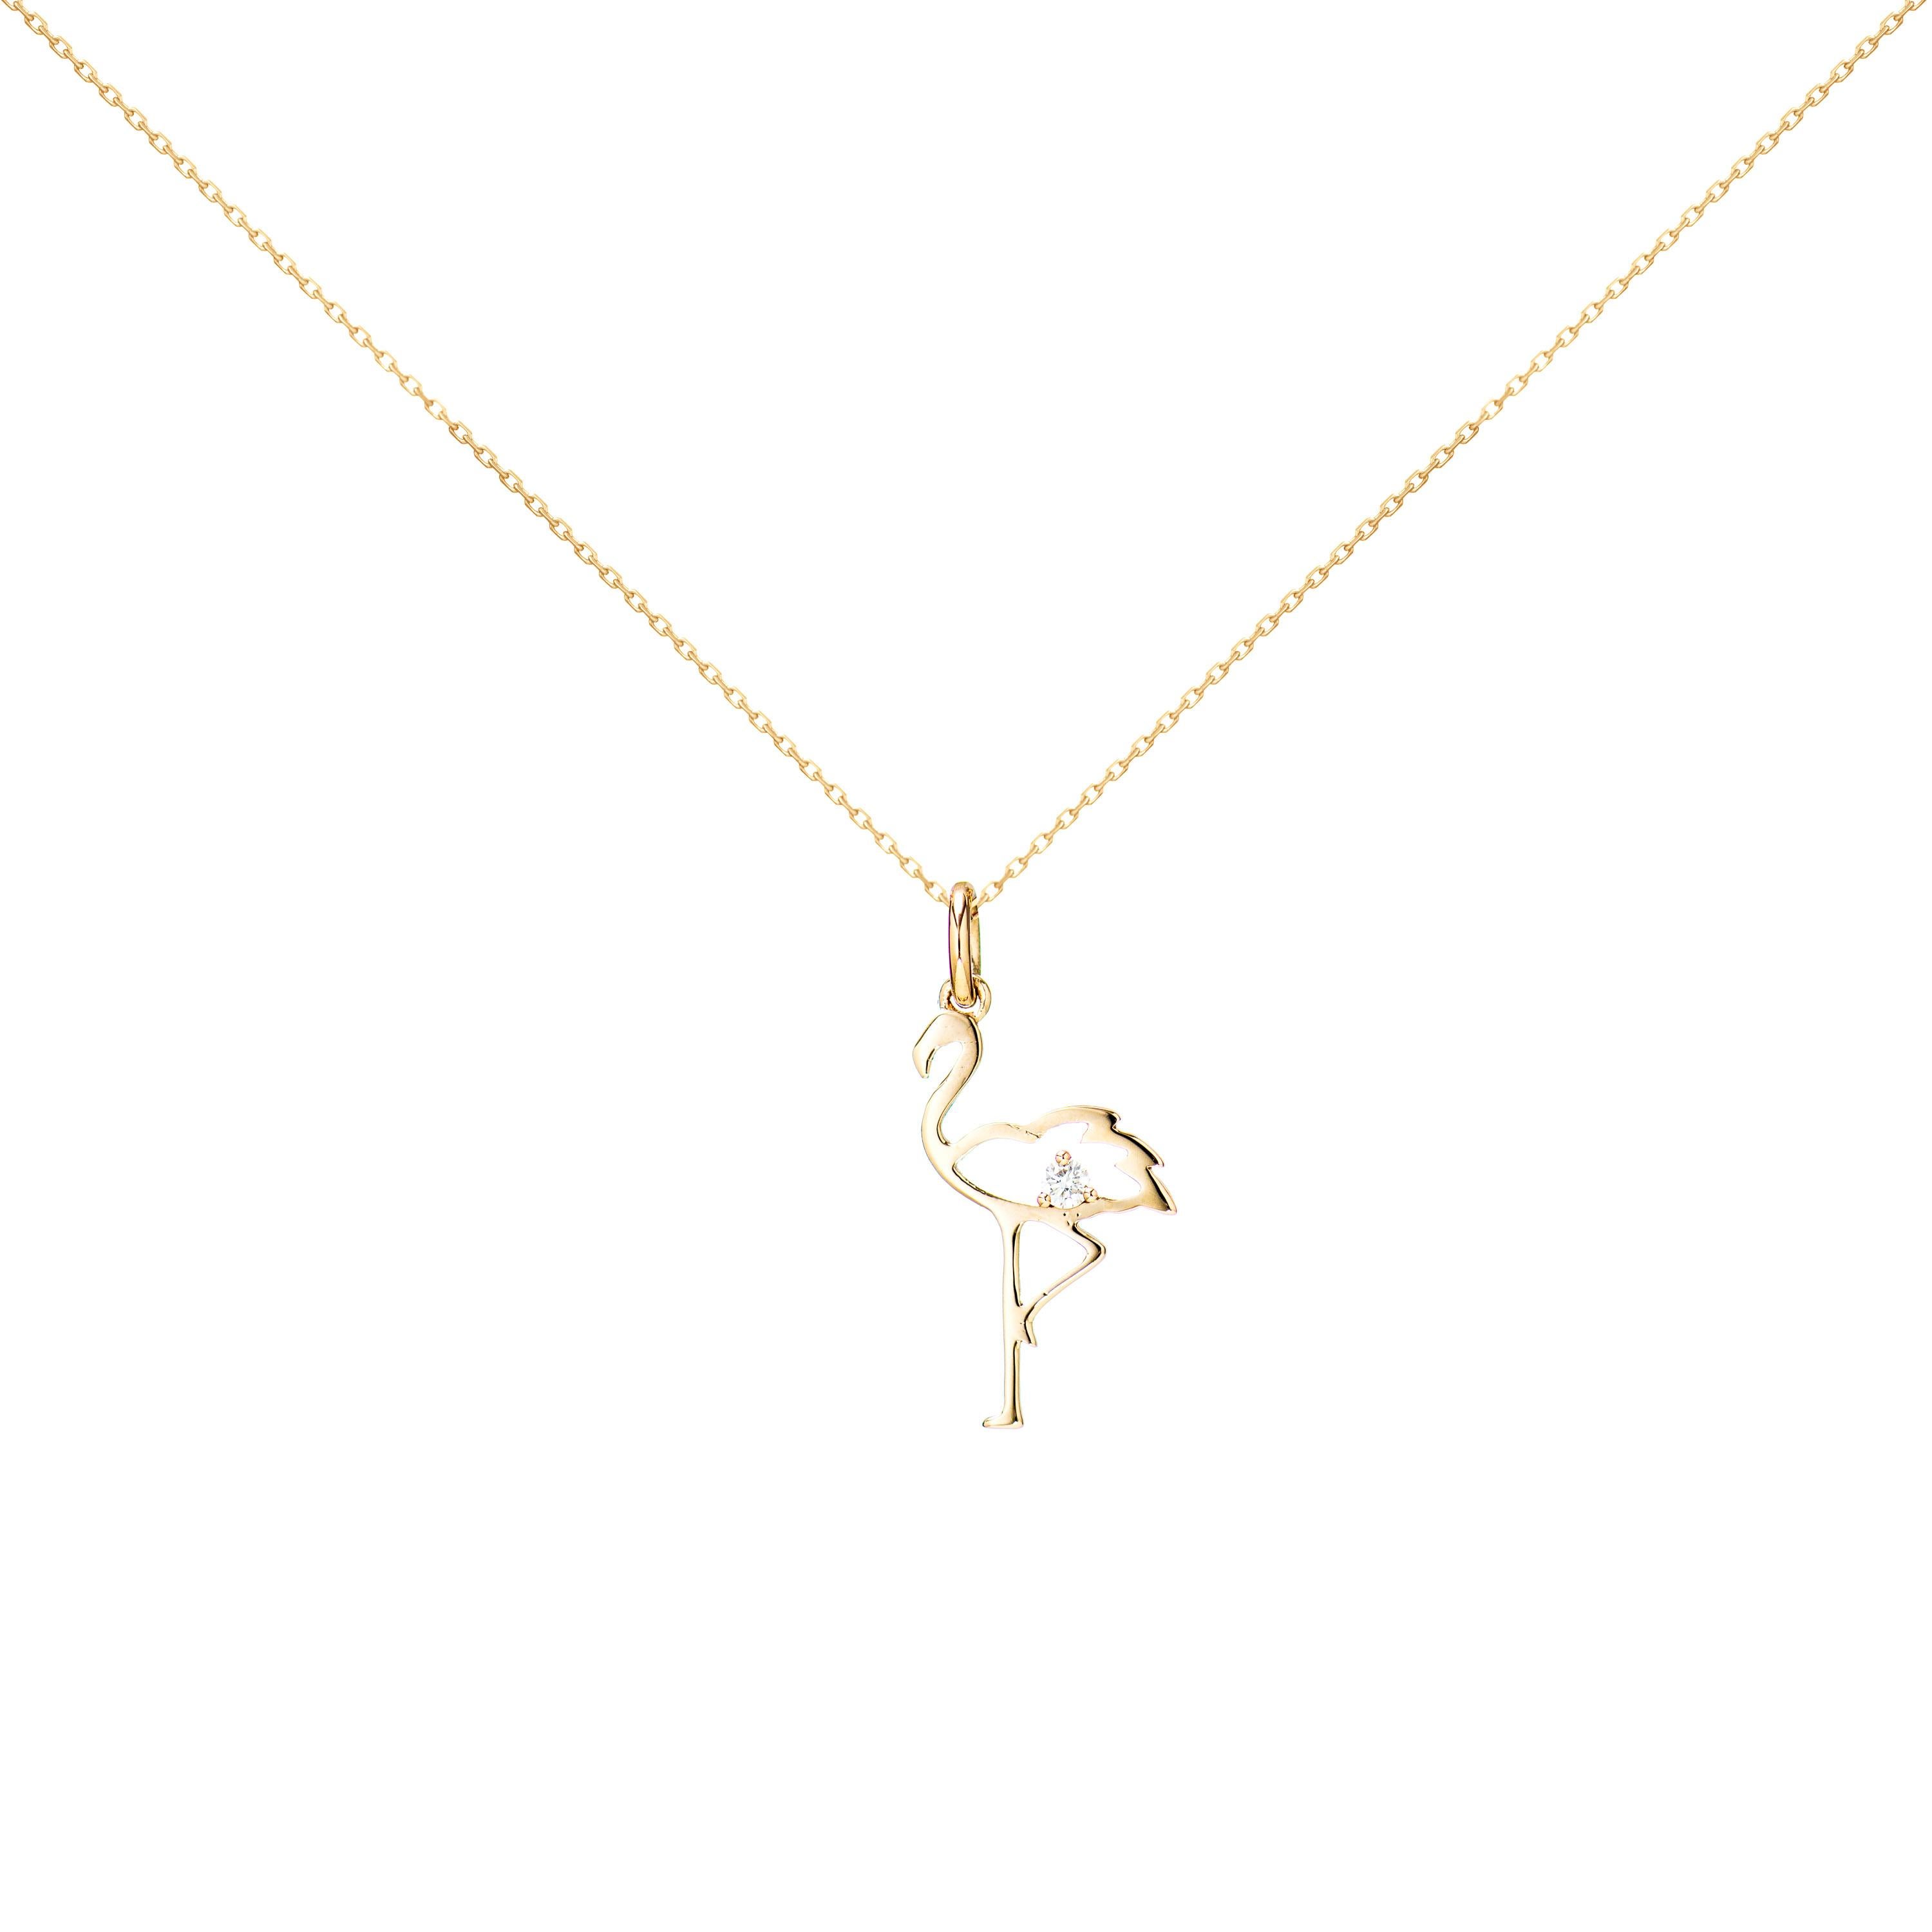 AS29
14kt yellow gold diamond Flamingo necklace
Stand tall girl. Boasting a 14kt yellow gold construction and adorned with a diamond, this Flamingo necklace from AS29 is here to elevate any of your looks. Don't turn your back on